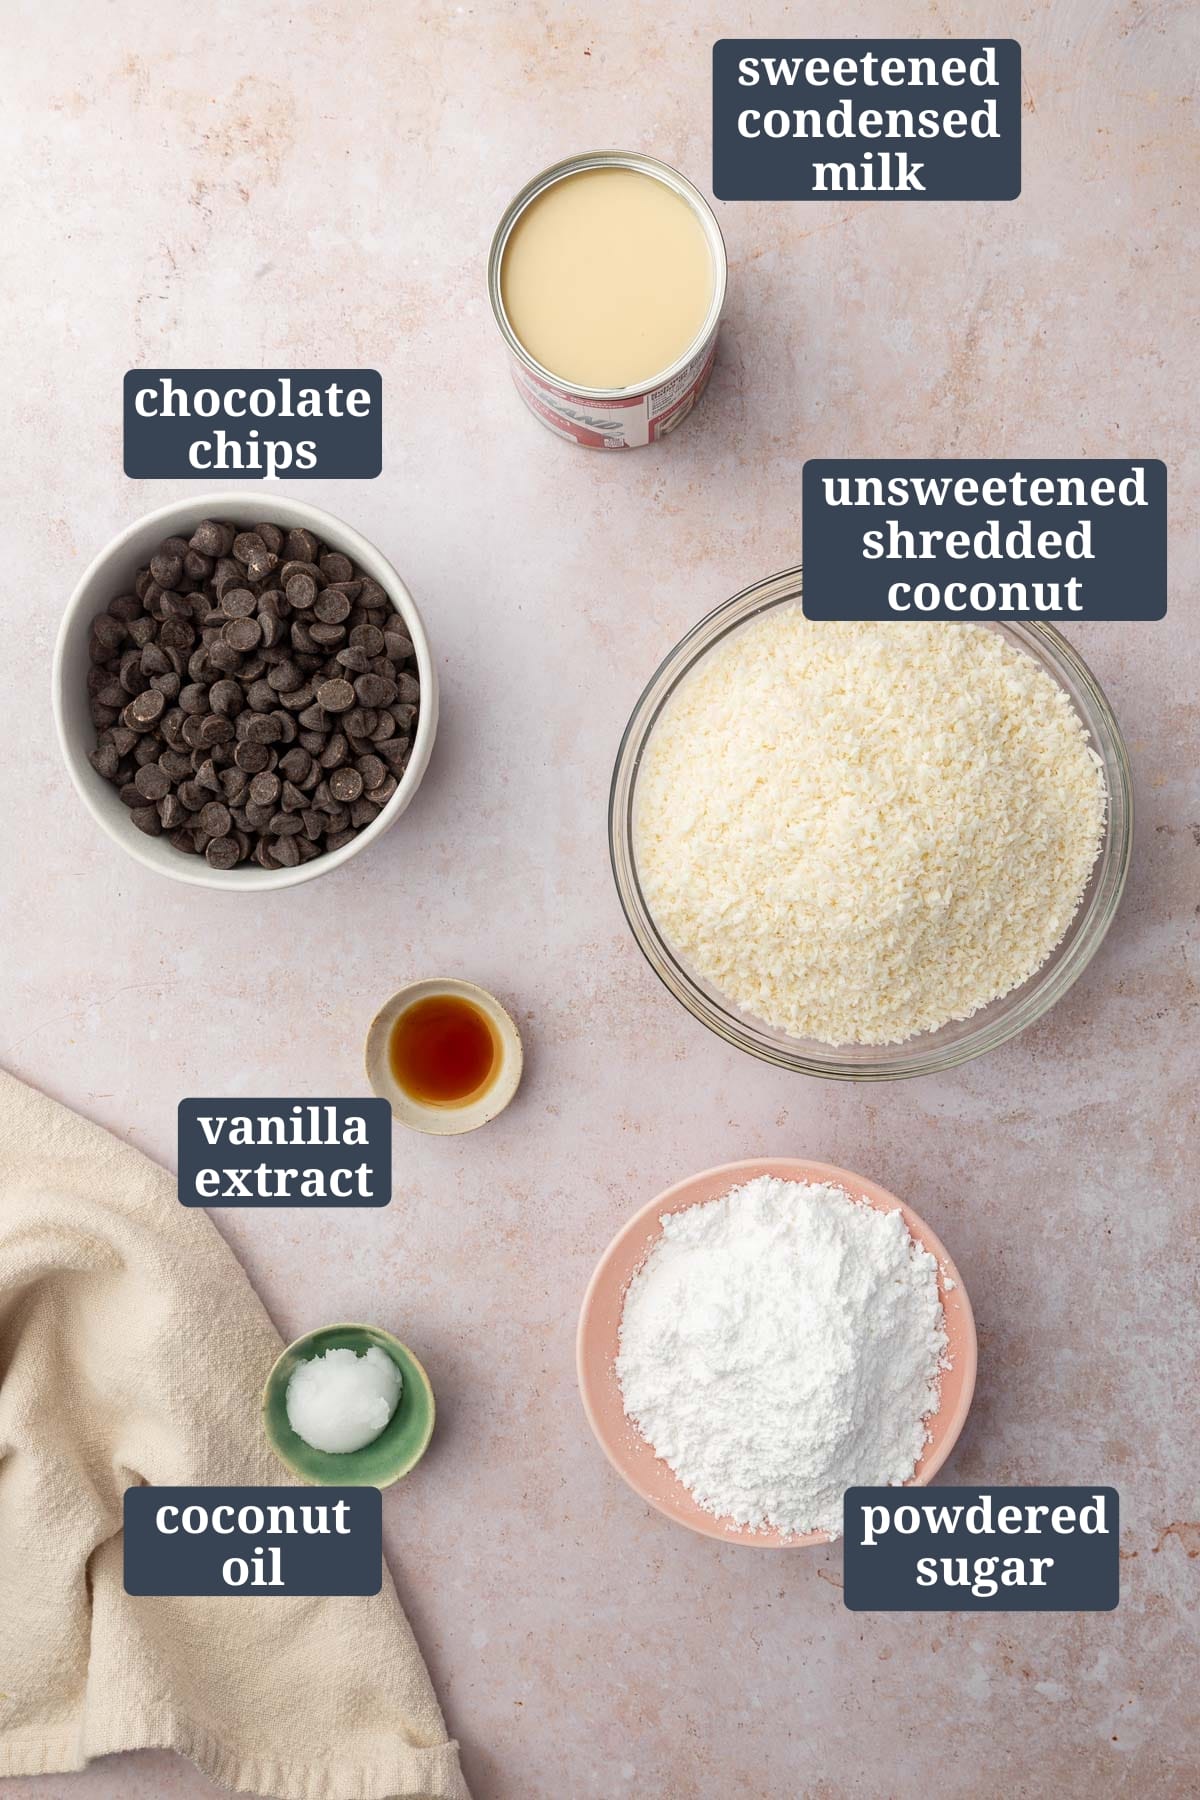 An overhead view of ingredients to make coconut balls including sweetened condensed milk, chocolate chips, unsweetened shredded coconut, vanilla extract, coconut oil, and powdered sugar with text overlays over each ingredient to say what it is.